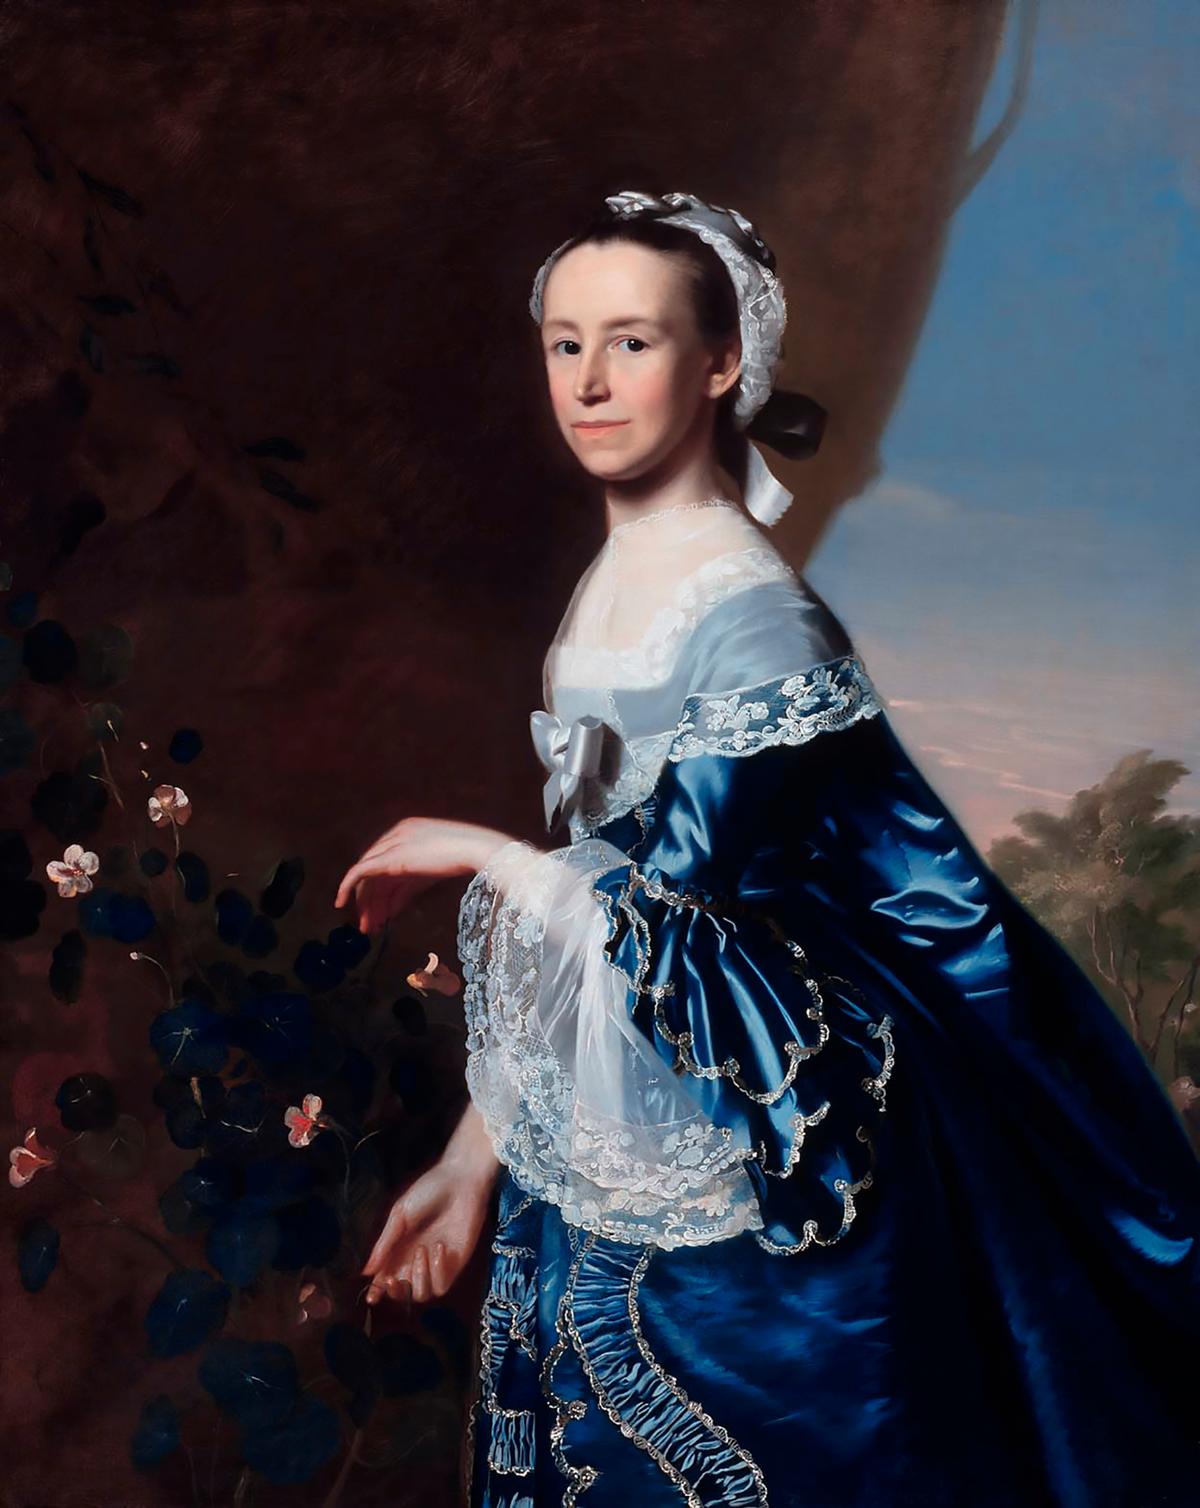 The woman who contributed to our nation's beginning. A portrait of Mercy Otis Warren, circa 1763, by John Singleton Copley. Oil on canvas. Museum of Fine Arts Boston. (Public Domain)